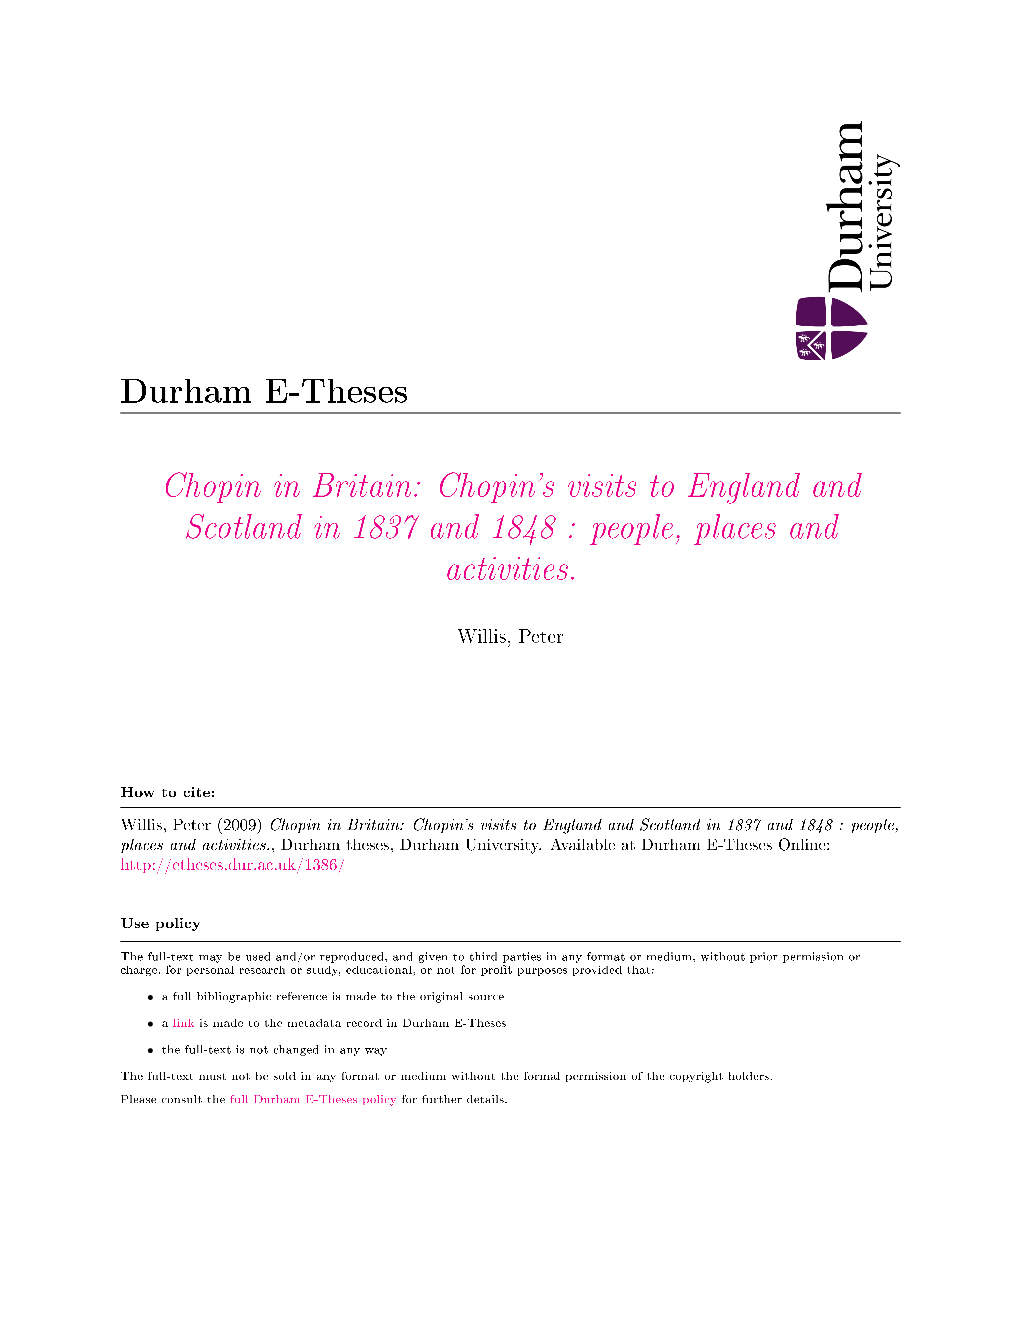 Chopin in Britain: Chopin's Visits to England and Scotland in 1837 and 1848 : People, Places and Activities